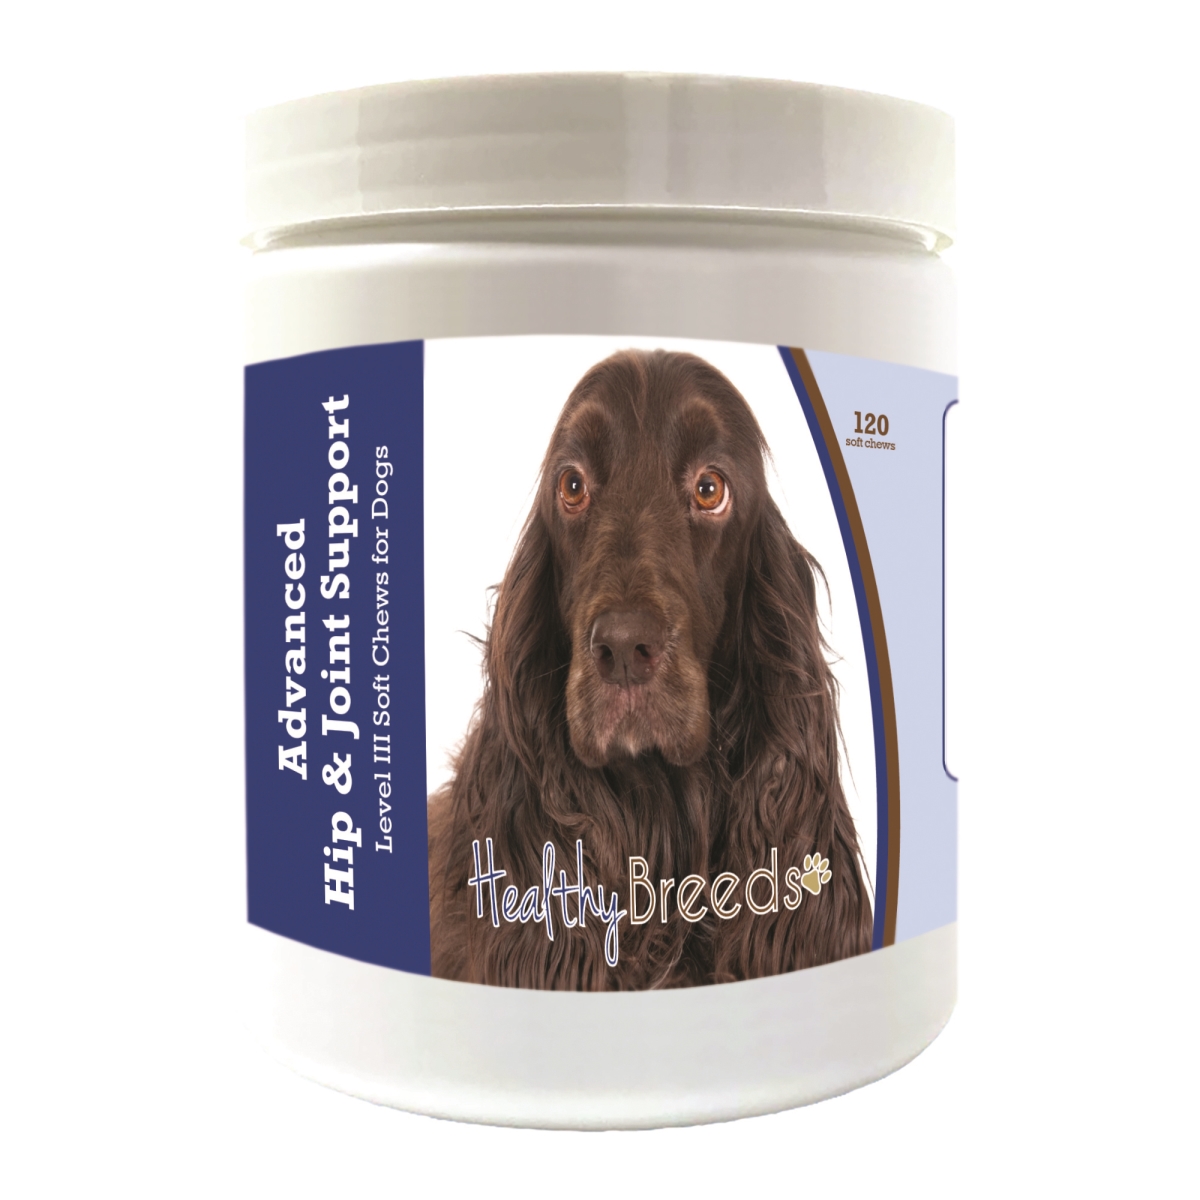 Picture of Healthy Breeds 192959898248 Field Spaniel Advanced Hip & Joint Support Level III Soft Chews for Dogs